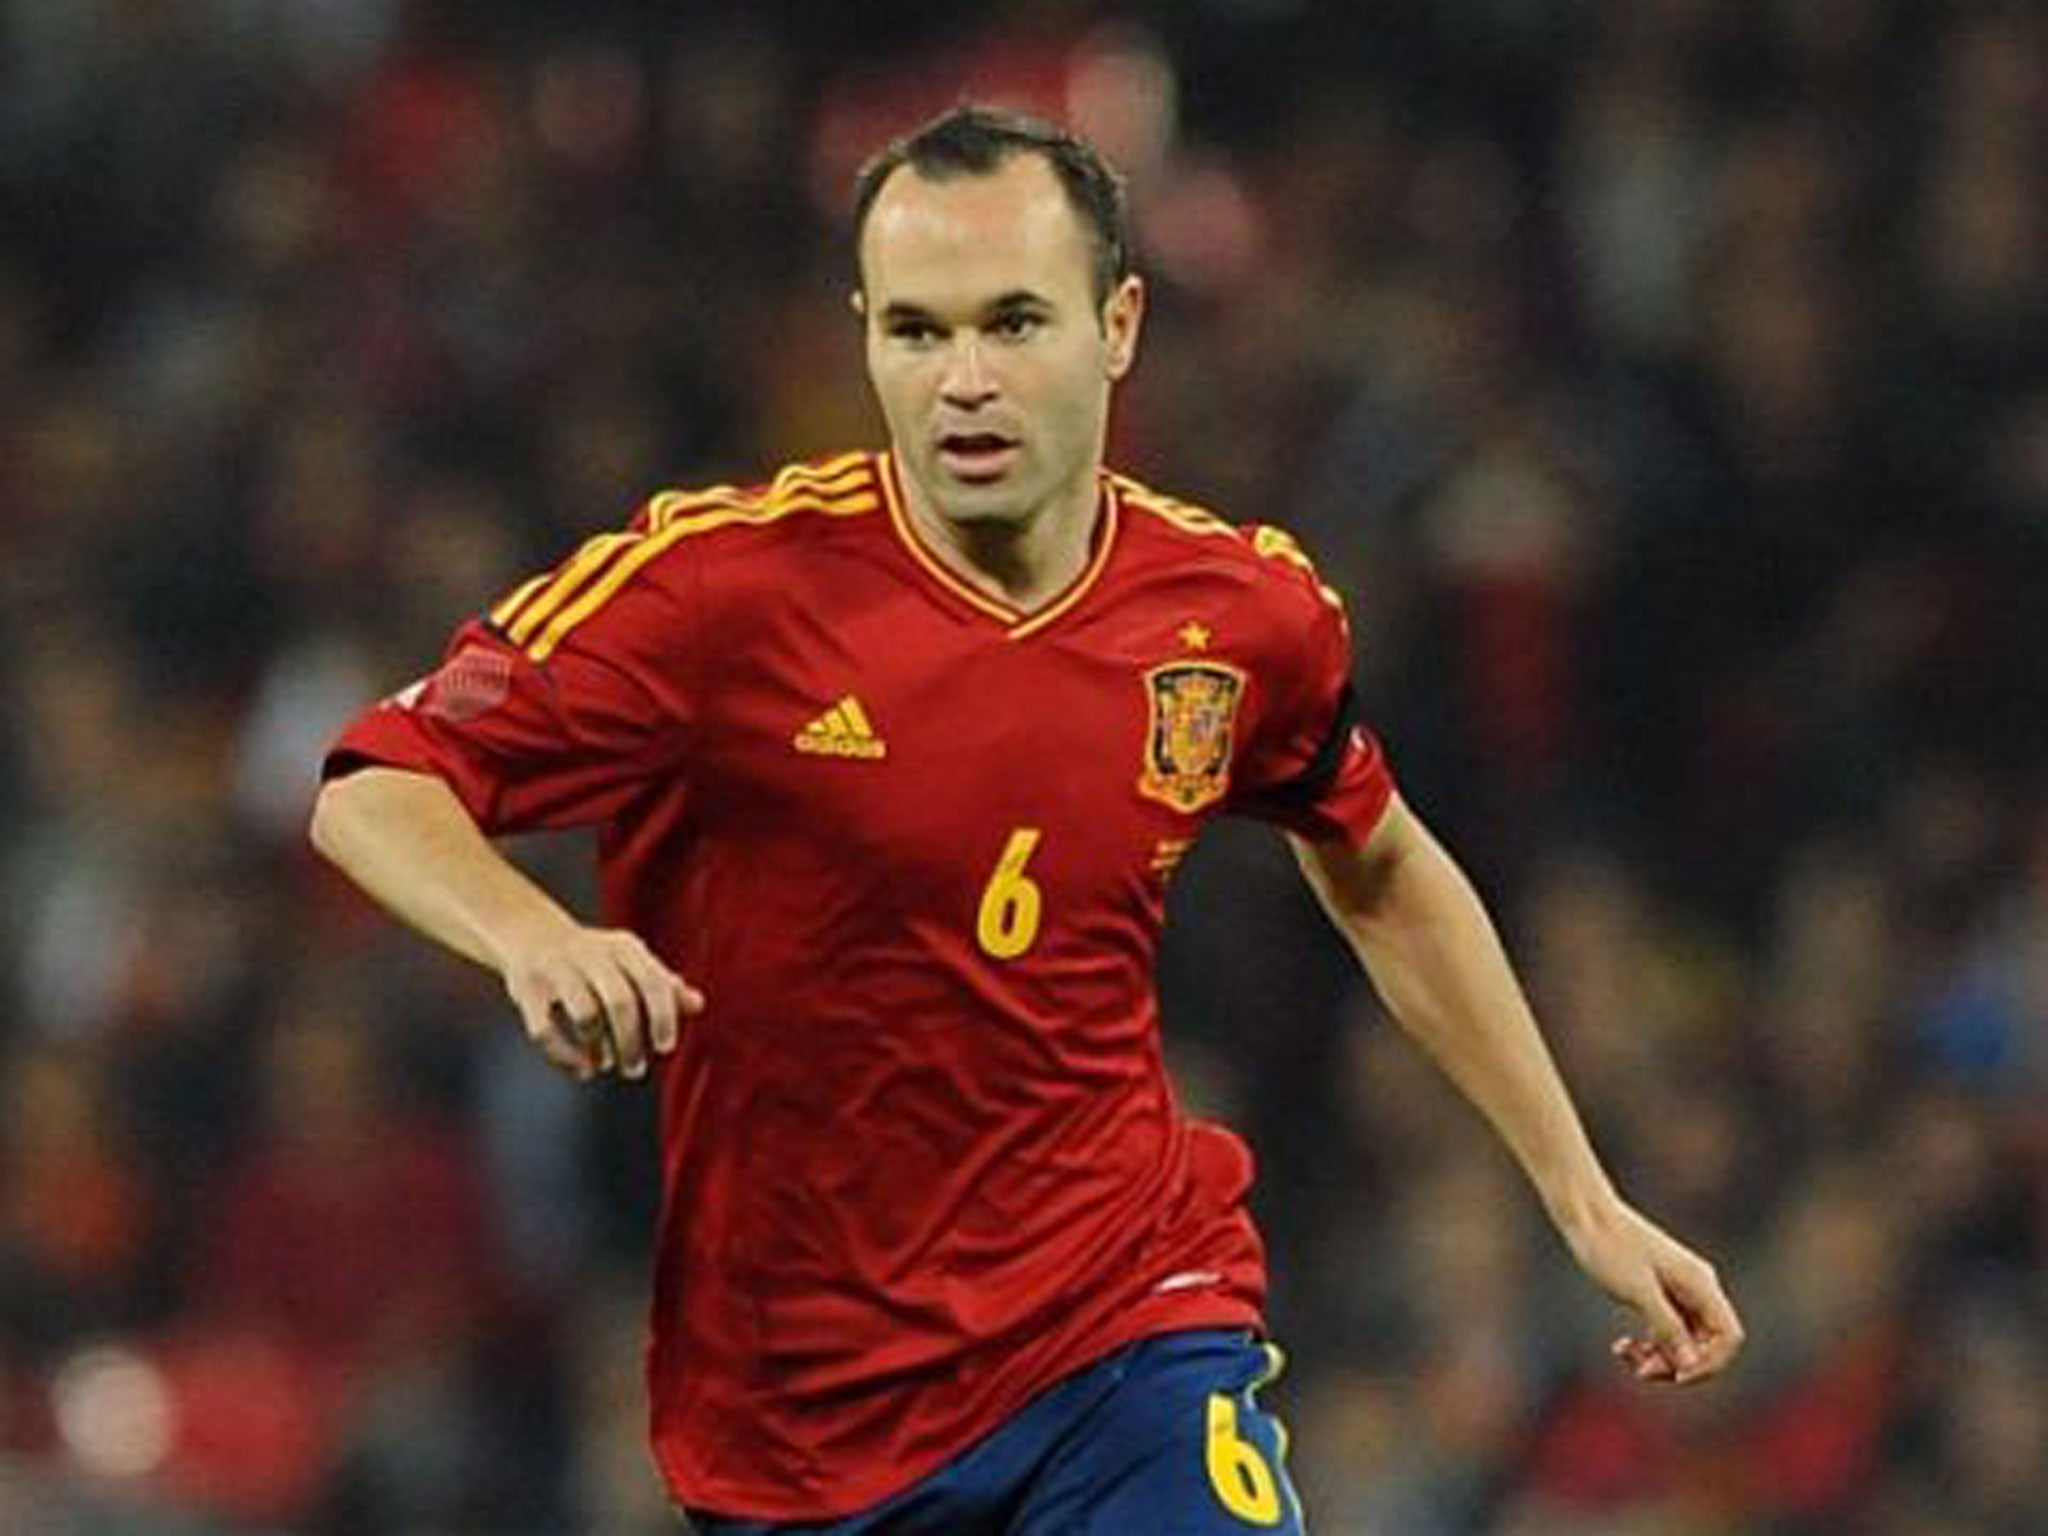 Andres Iniesta (Barcelona) Not quite as improbable as it sounds. Iniesta’s contract expires in 2015 and negotiations on a new deal have stalled. David Moyes has castigated his midfield for their inability to pass and there are none better at tha